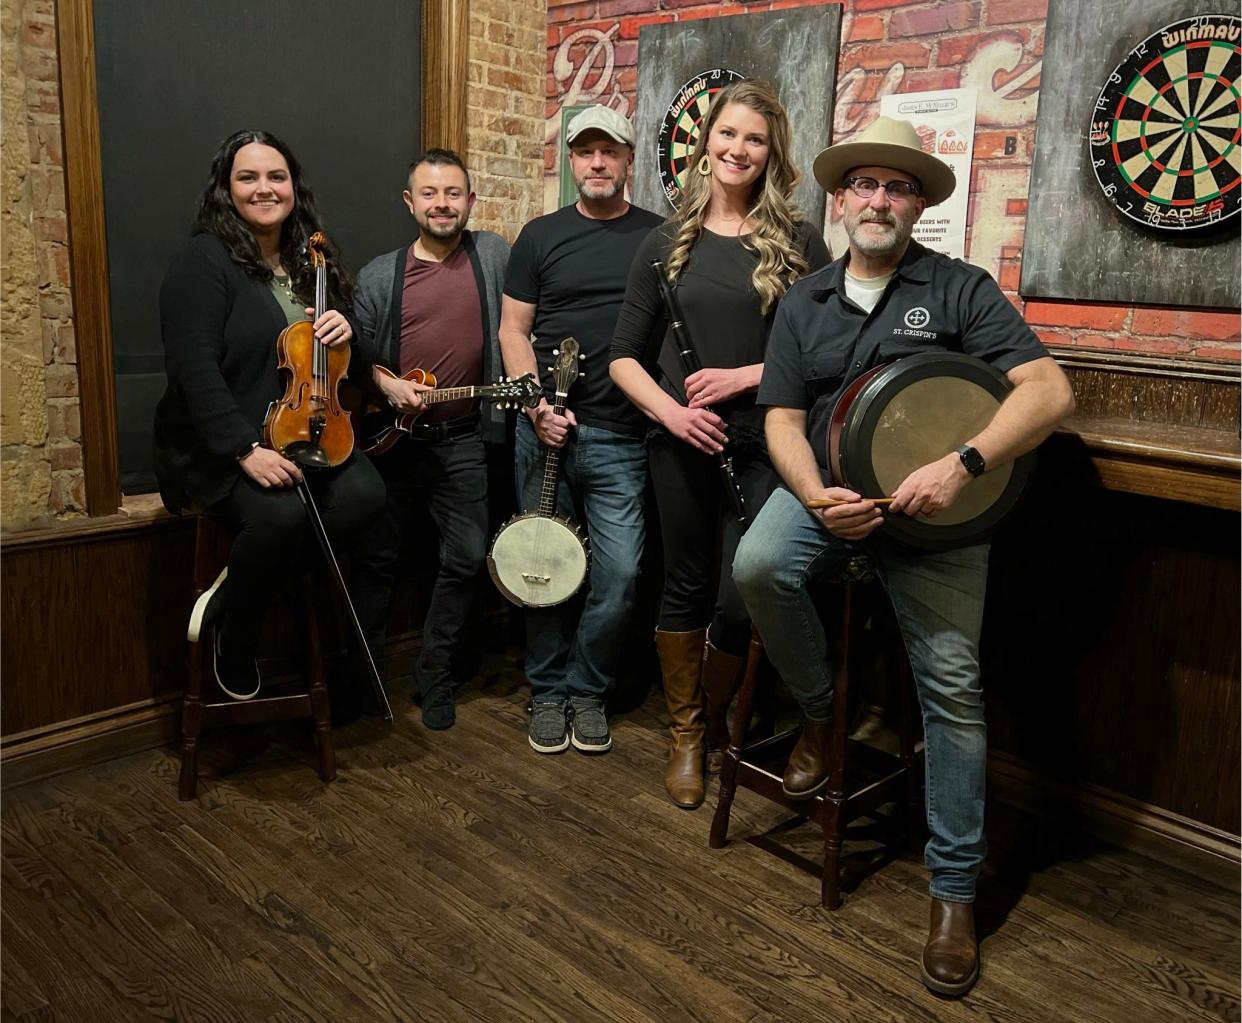 The Irish Breakfast Club is a traditional Irish session band based in Oklahoma City.